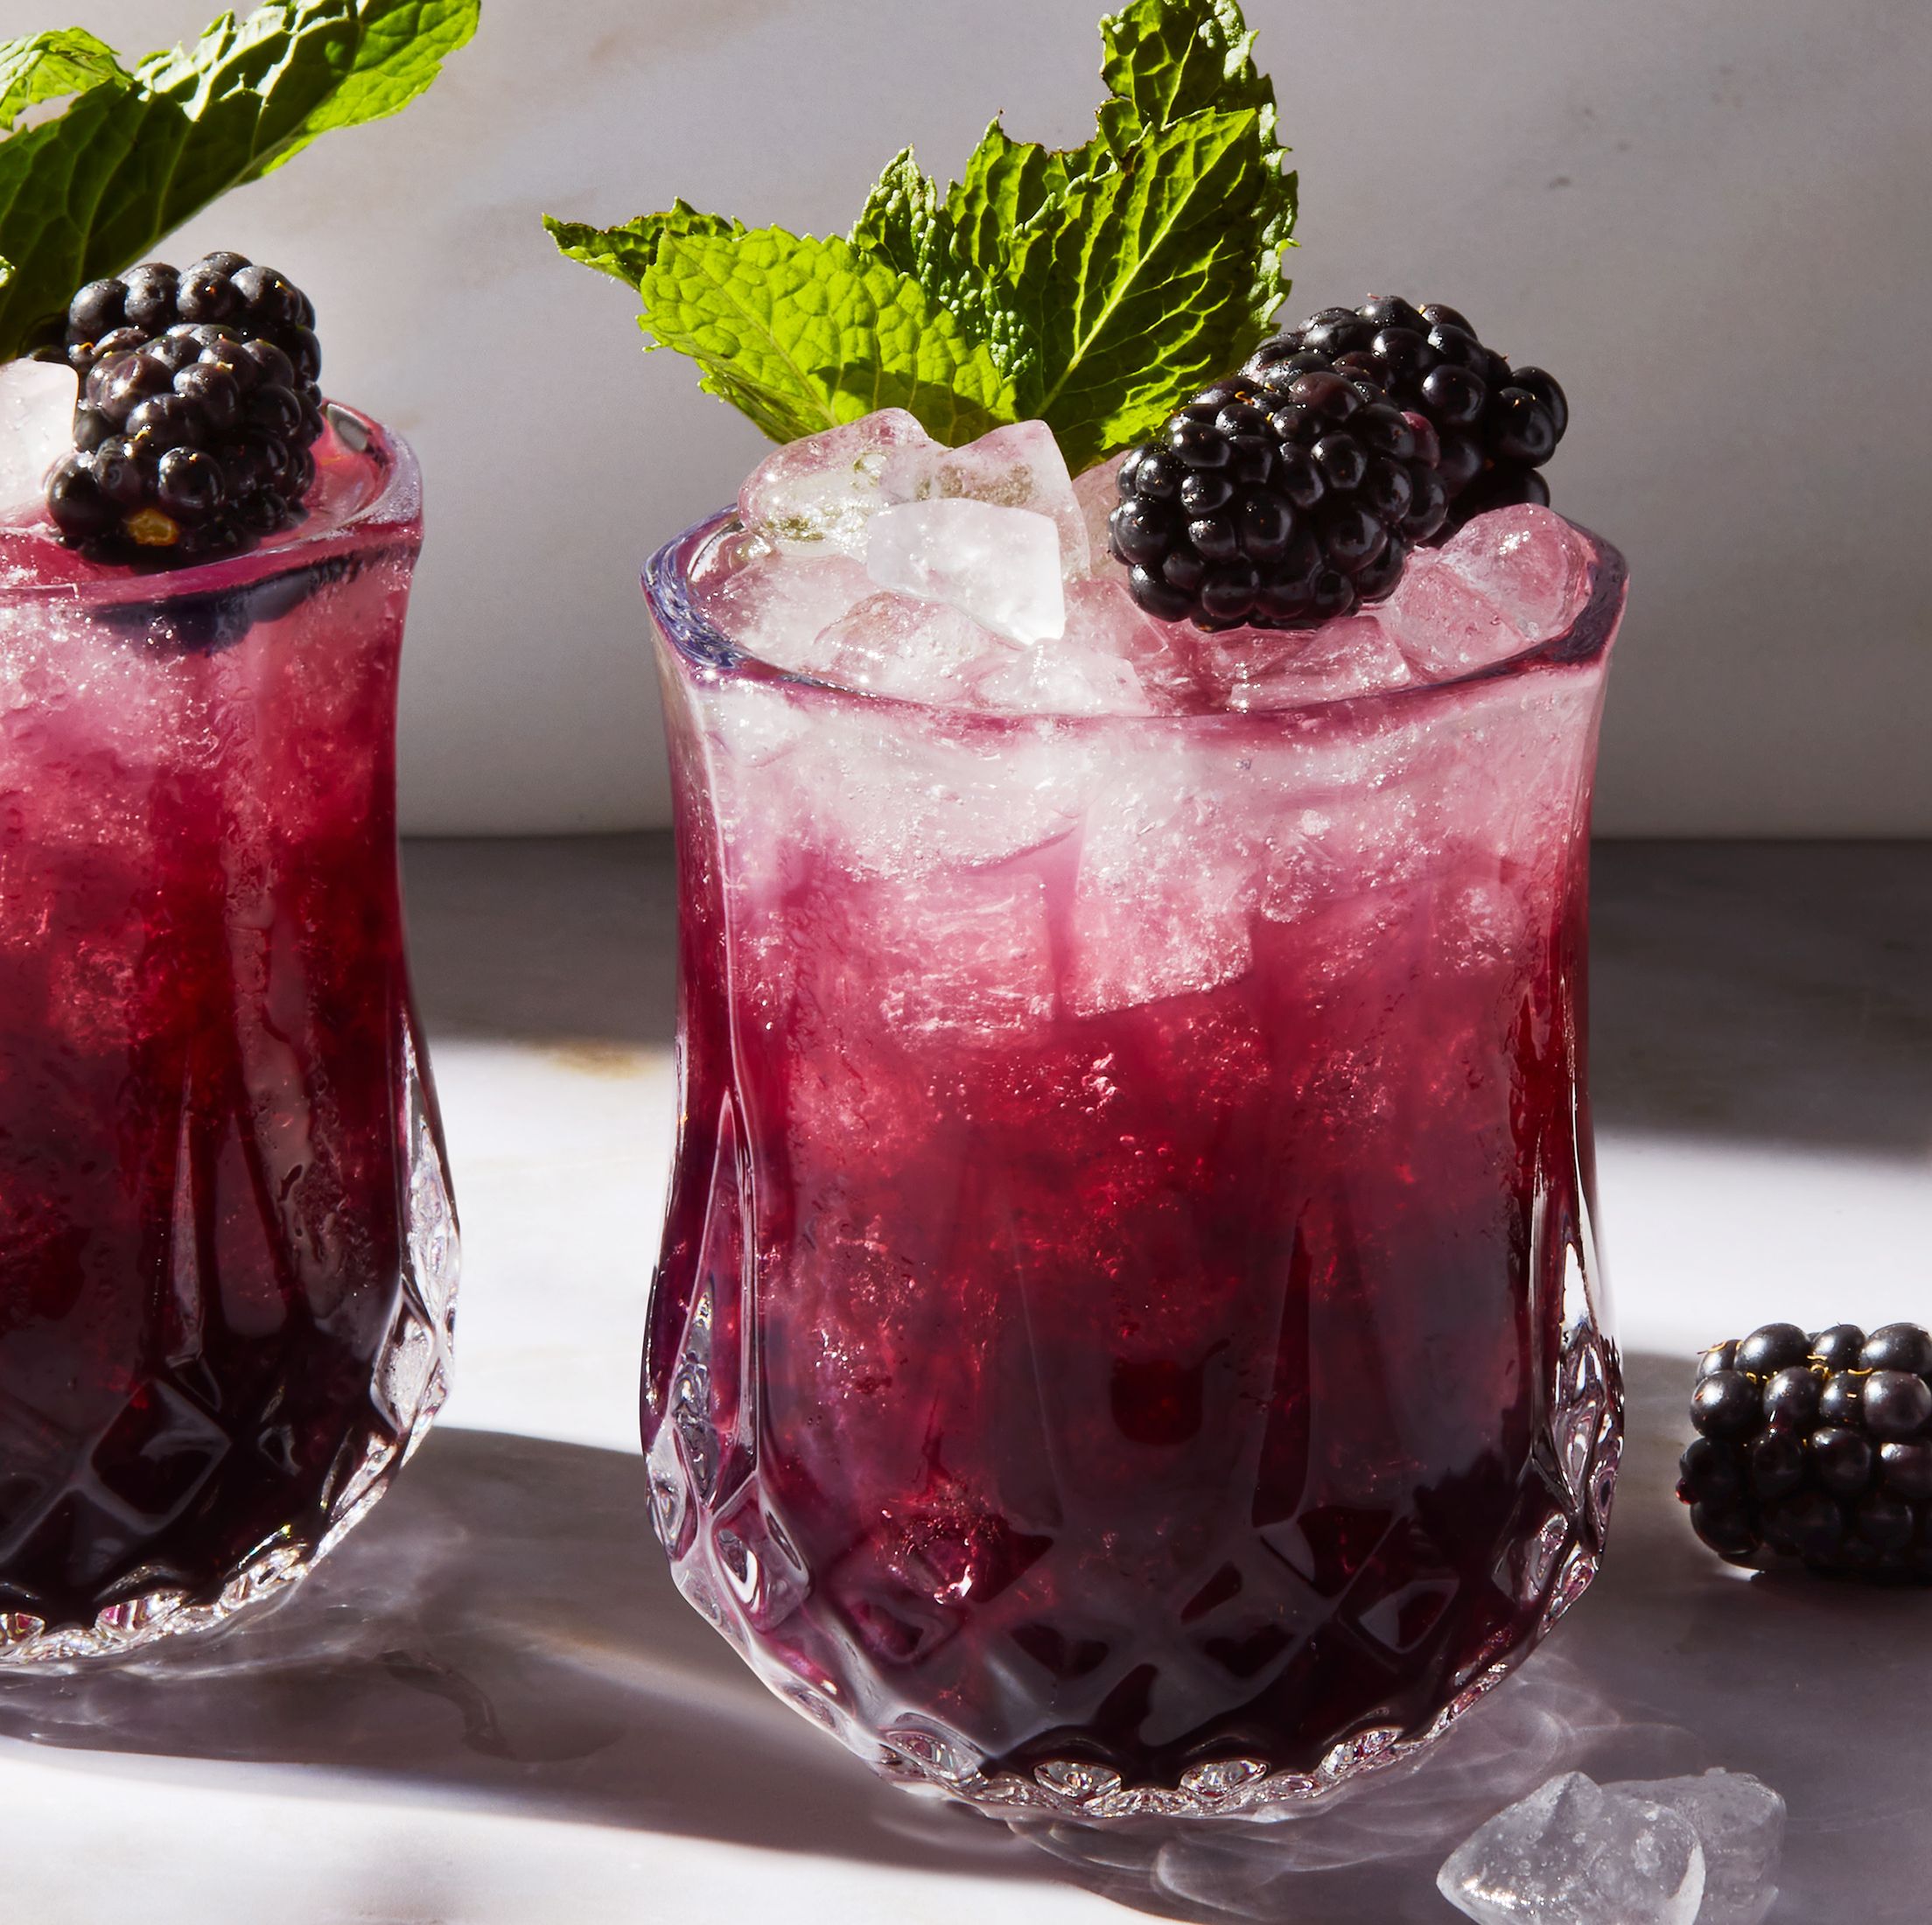 This Blackberry-Mint Julep Is Our Favorite Way To Shake Up The Classic Cocktail